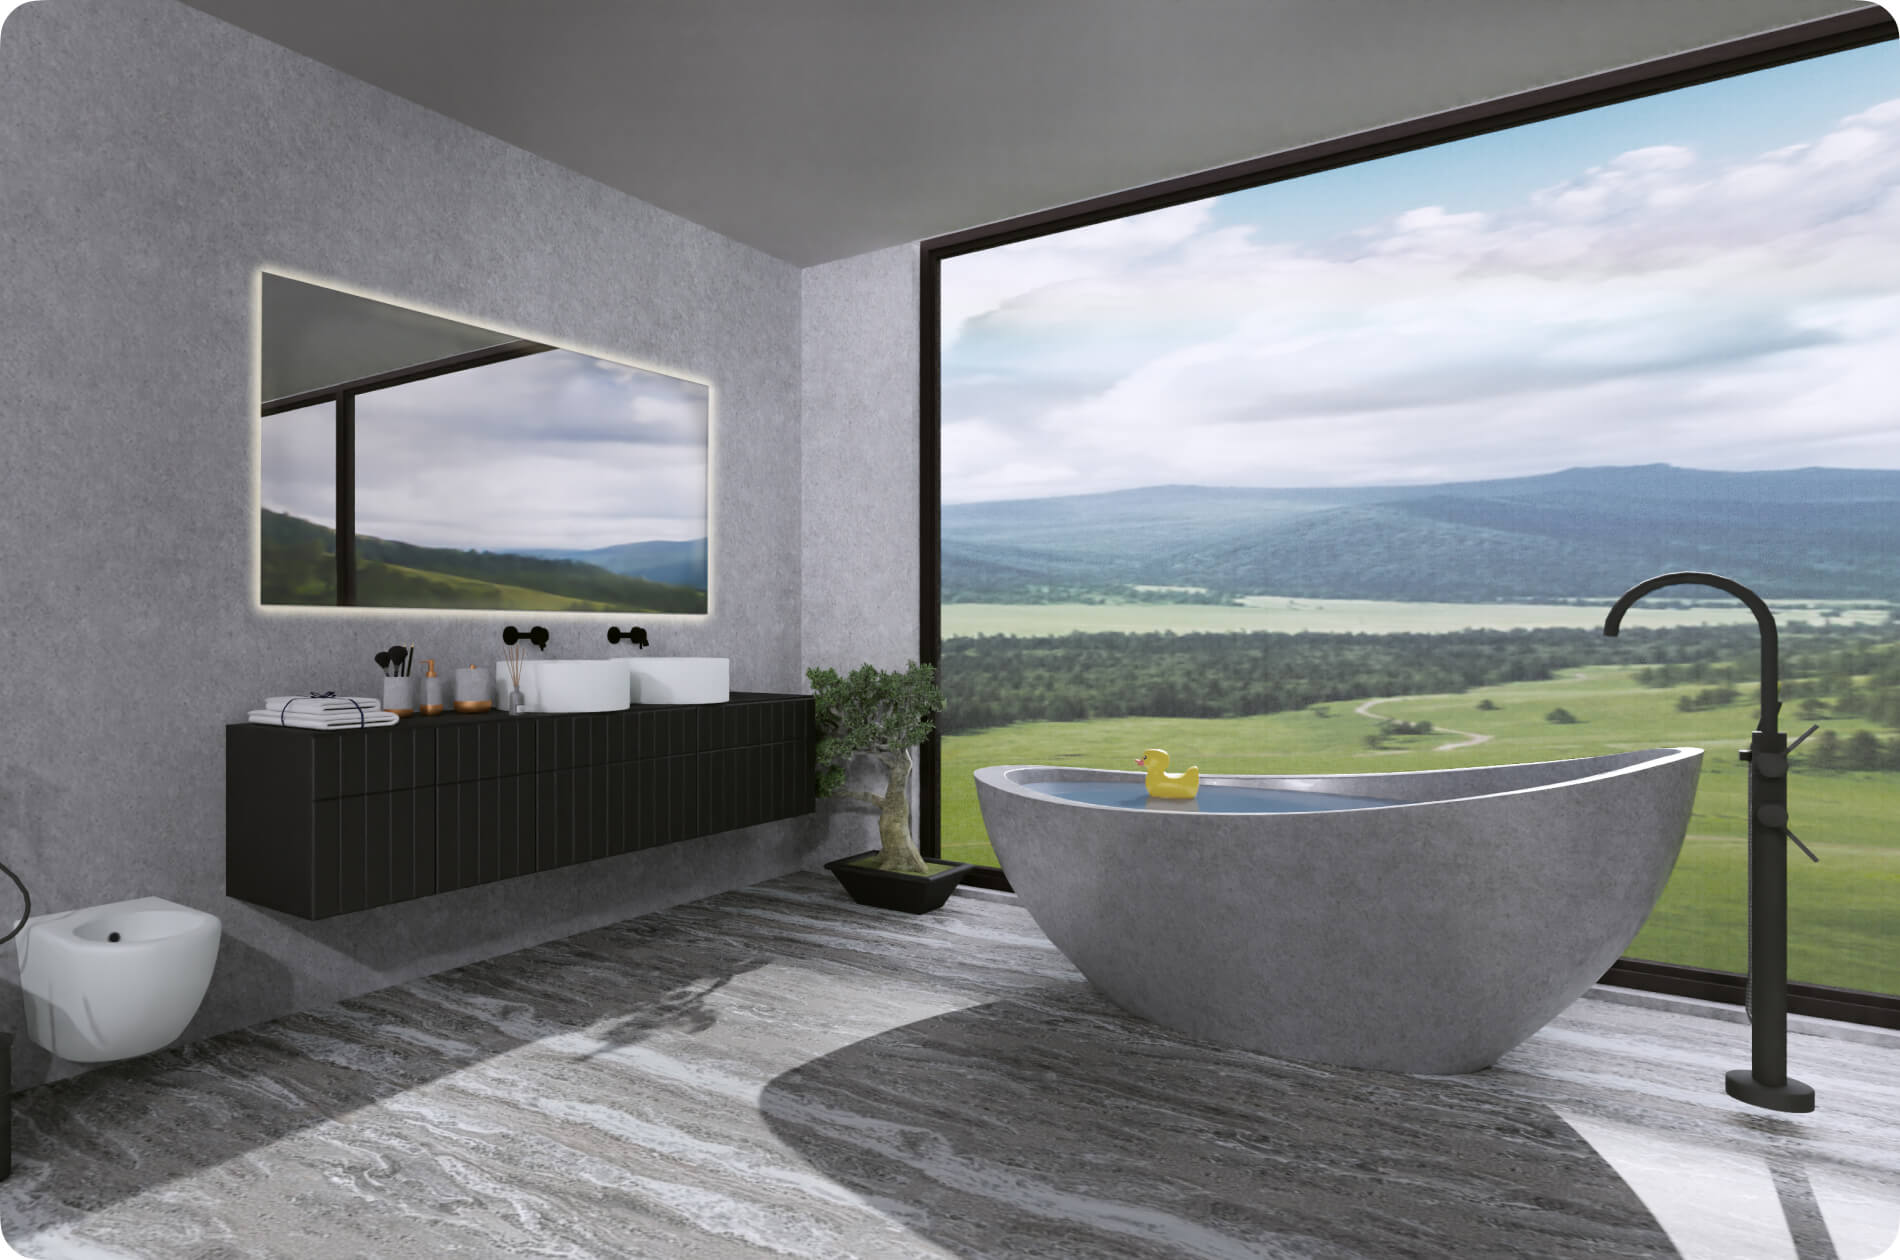 A bathroom with a magnificent view.